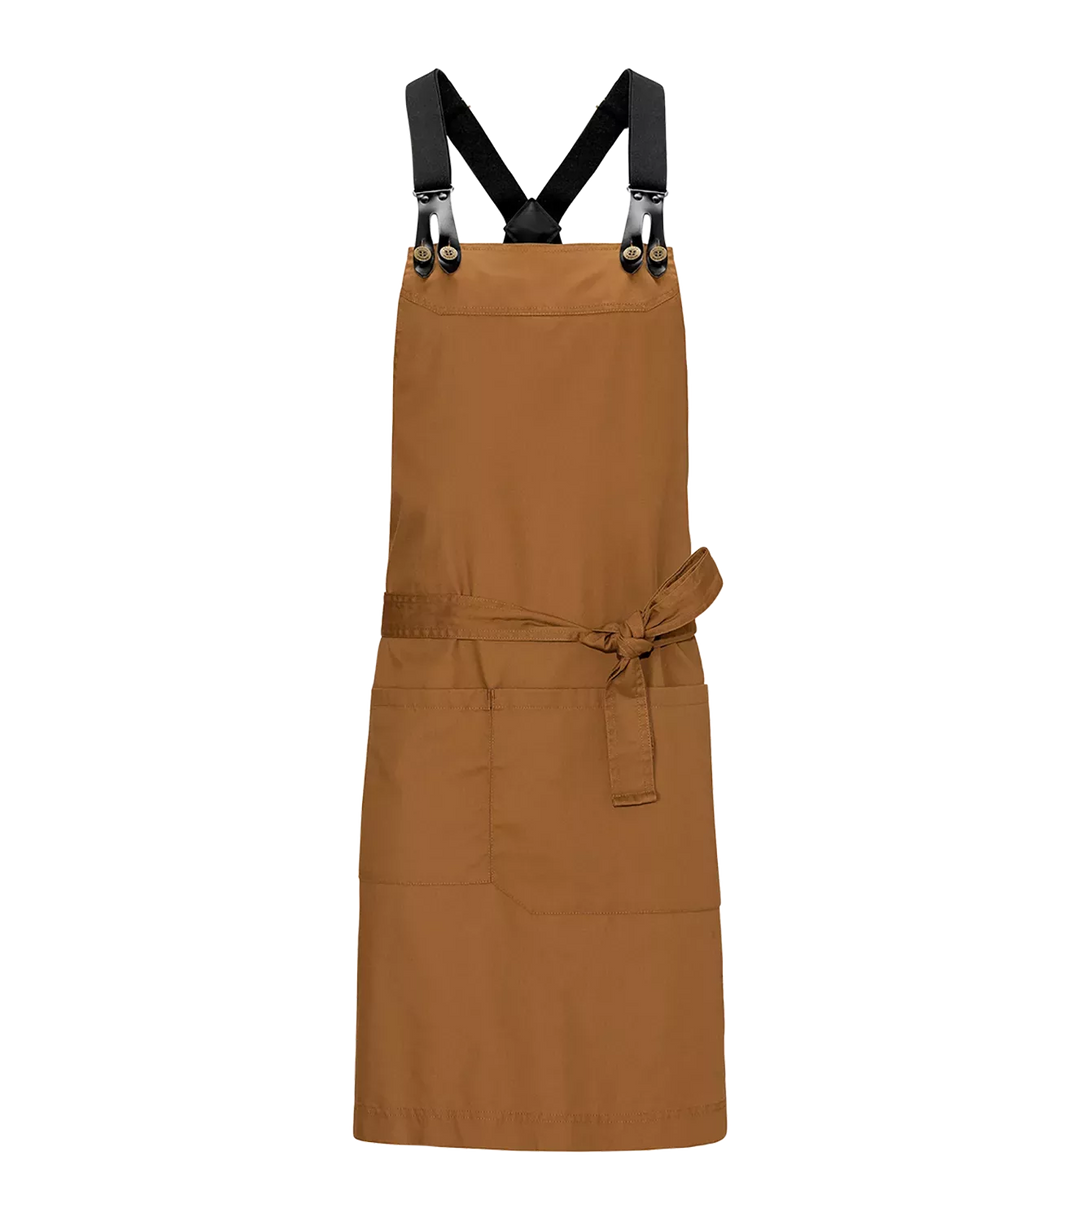 Chef Apron for Men and Women with Large Pockets , Canvas Cross Back Cotton Work Aprons,Size M to XXL, Black, Size: 26 x 30